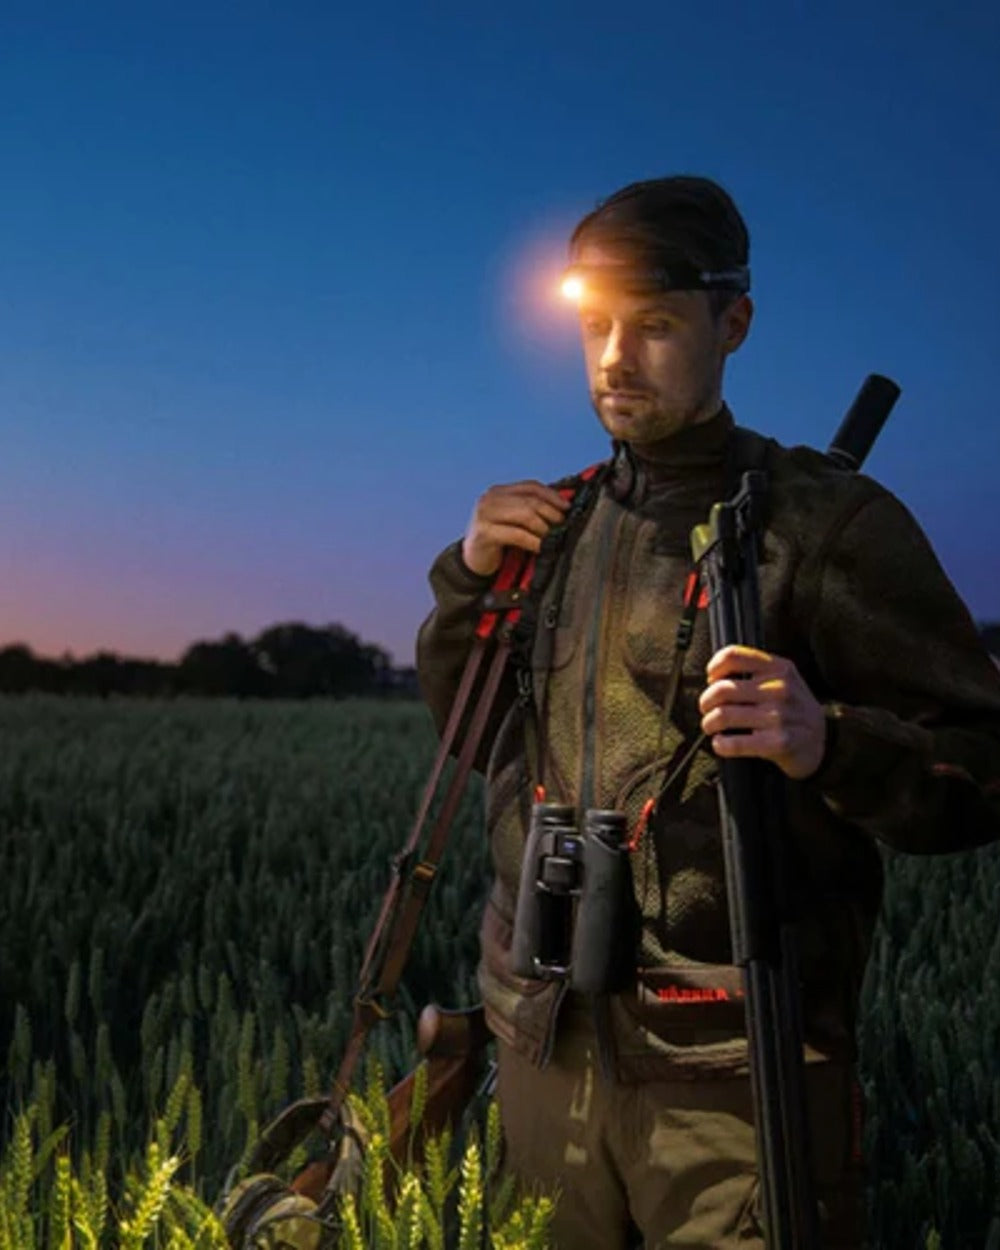 AXIS MSP Limited Edition coloured Harkila Kamko Pro Edition Reversible Jacket on field background at night